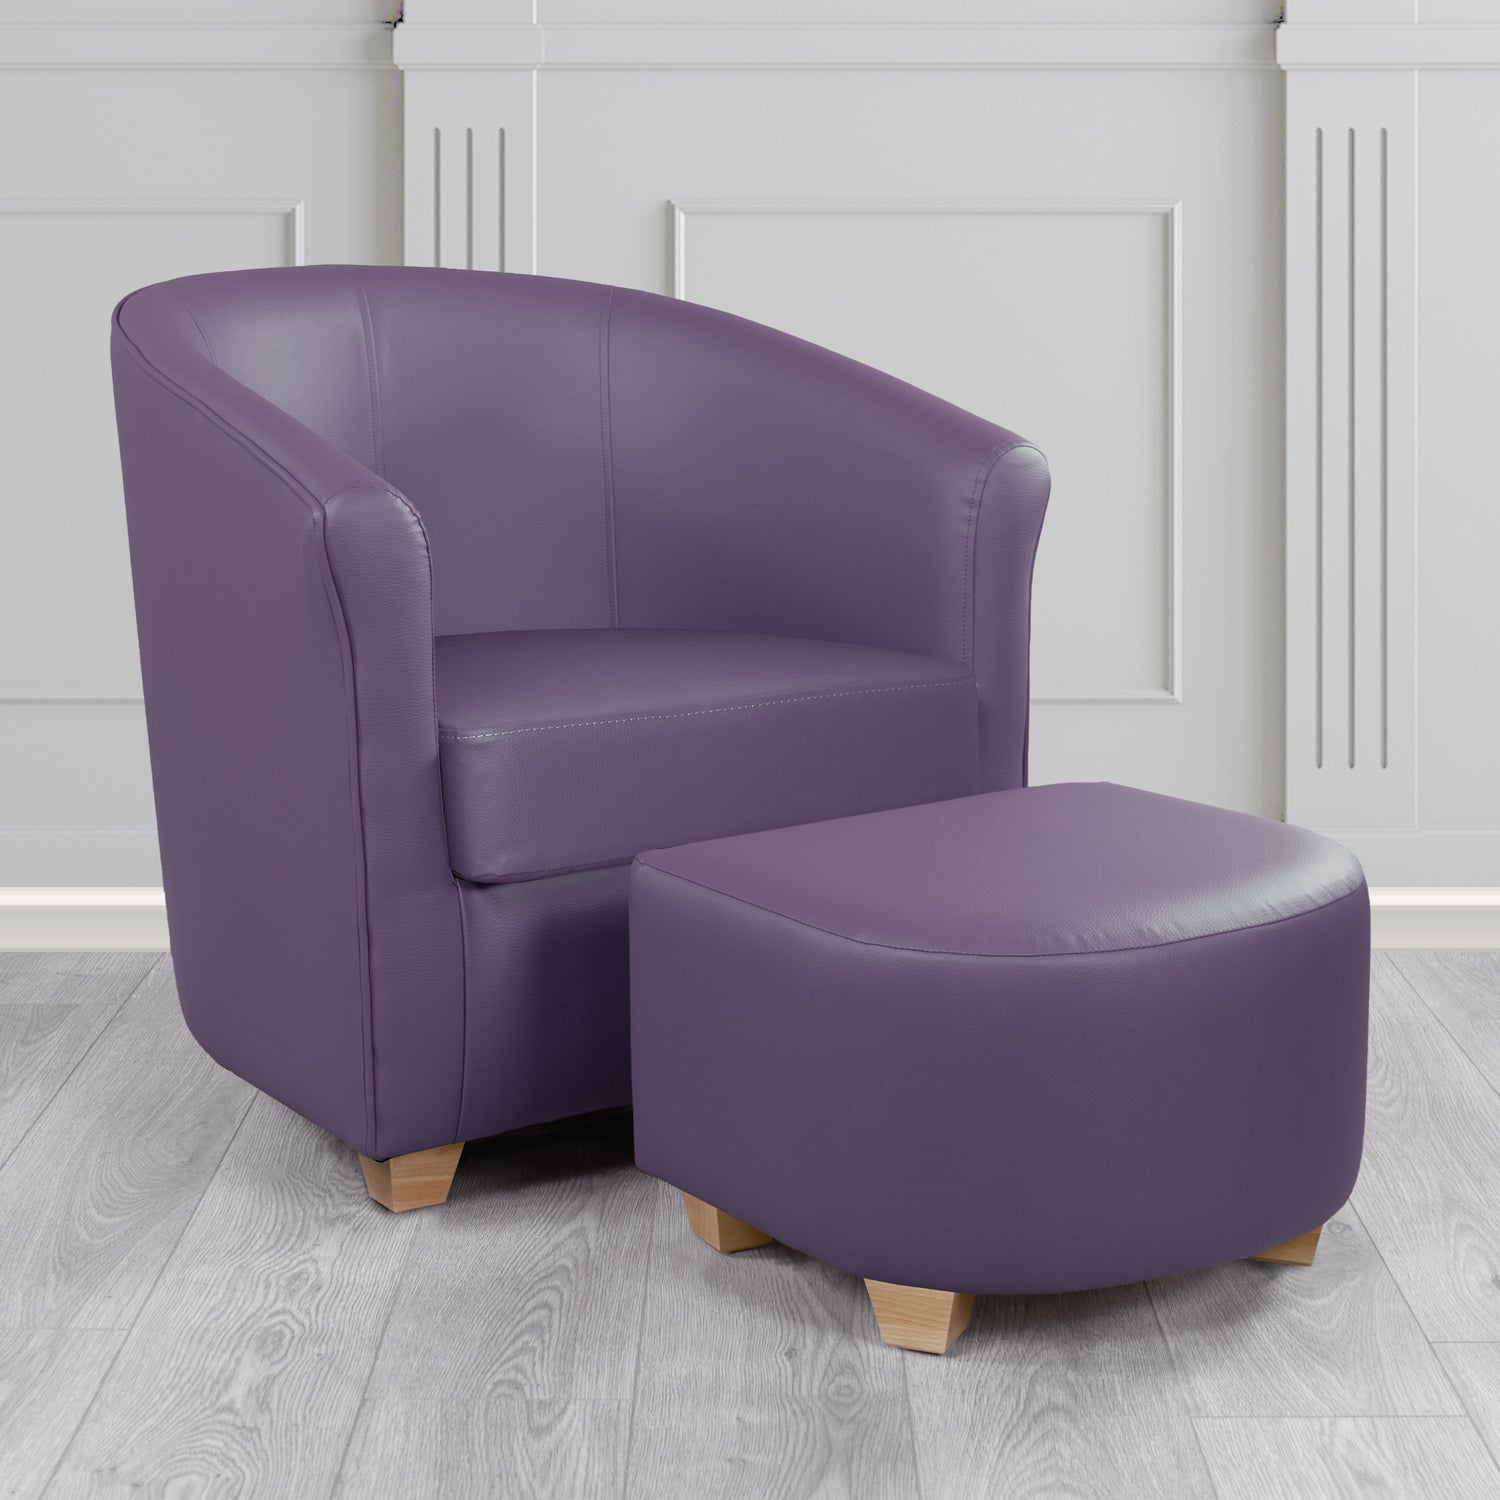 Cannes Tub Chair with Footstool Set in Just Colour Professor Plum Crib 5 Faux Leather - The Tub Chair Shop